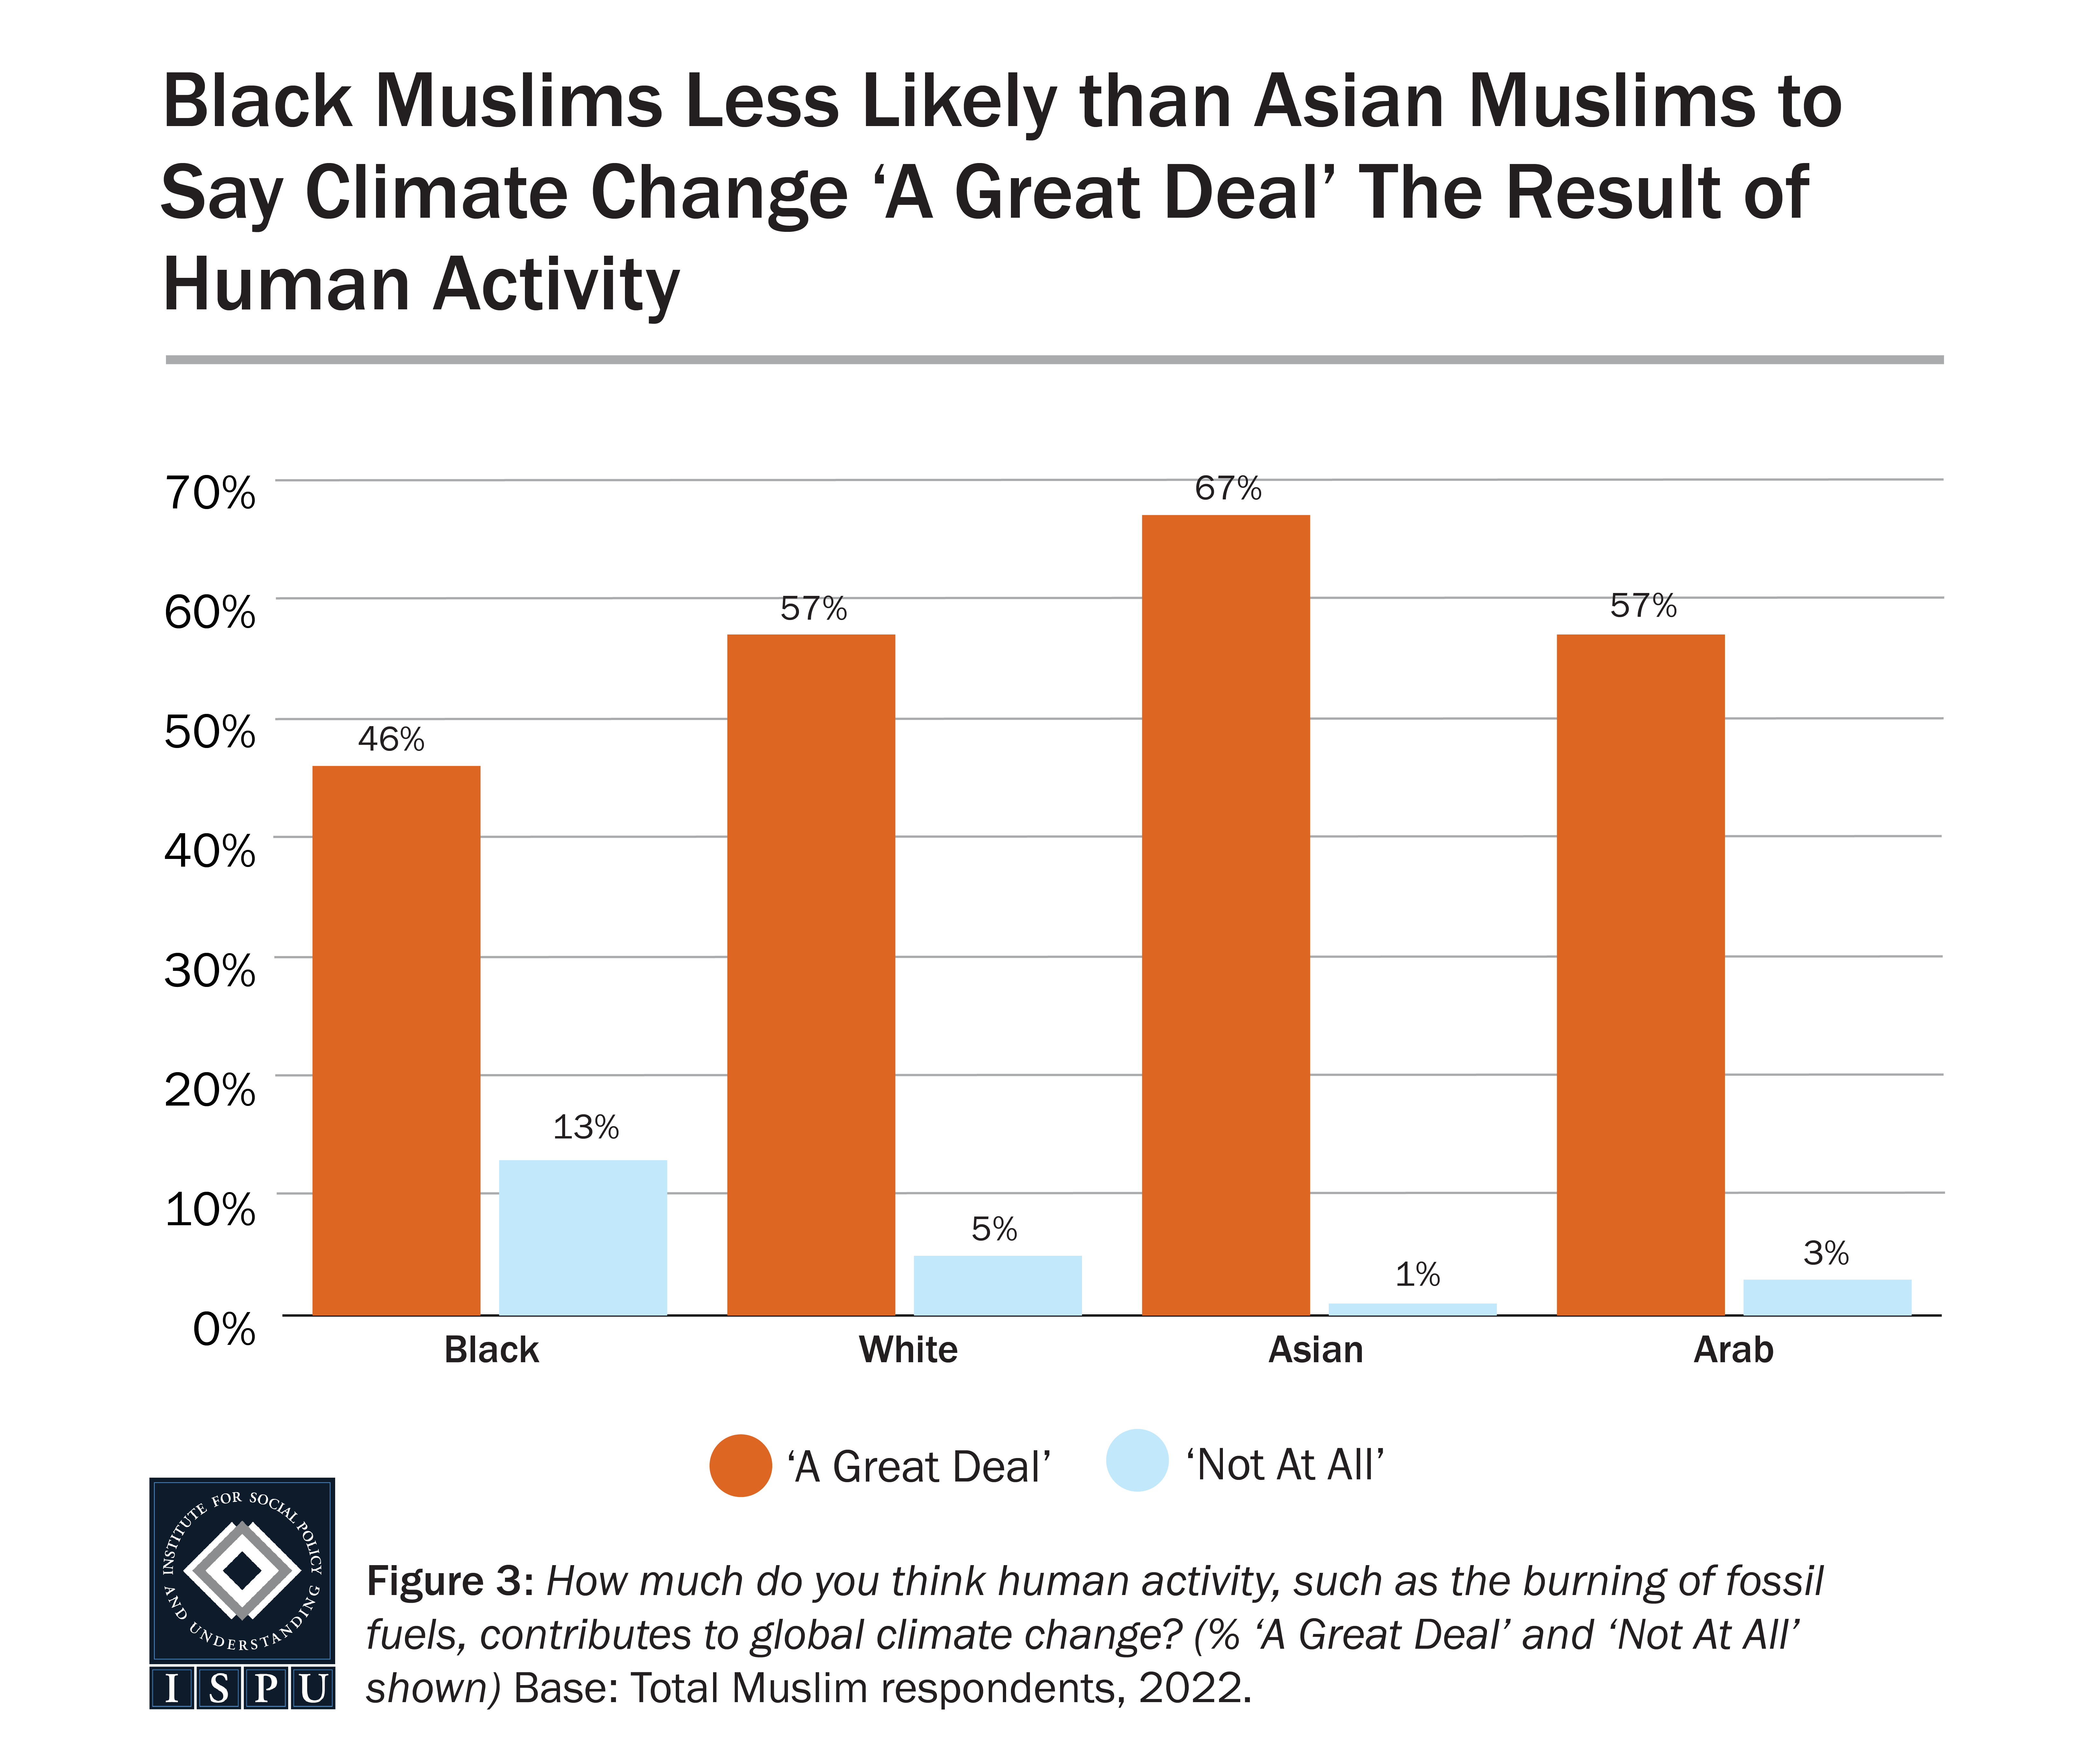 A bar graph showing the proportion of Muslims of different racial/ethnic groups who attribute climate change “a great deal” and "not at all" to human activity.